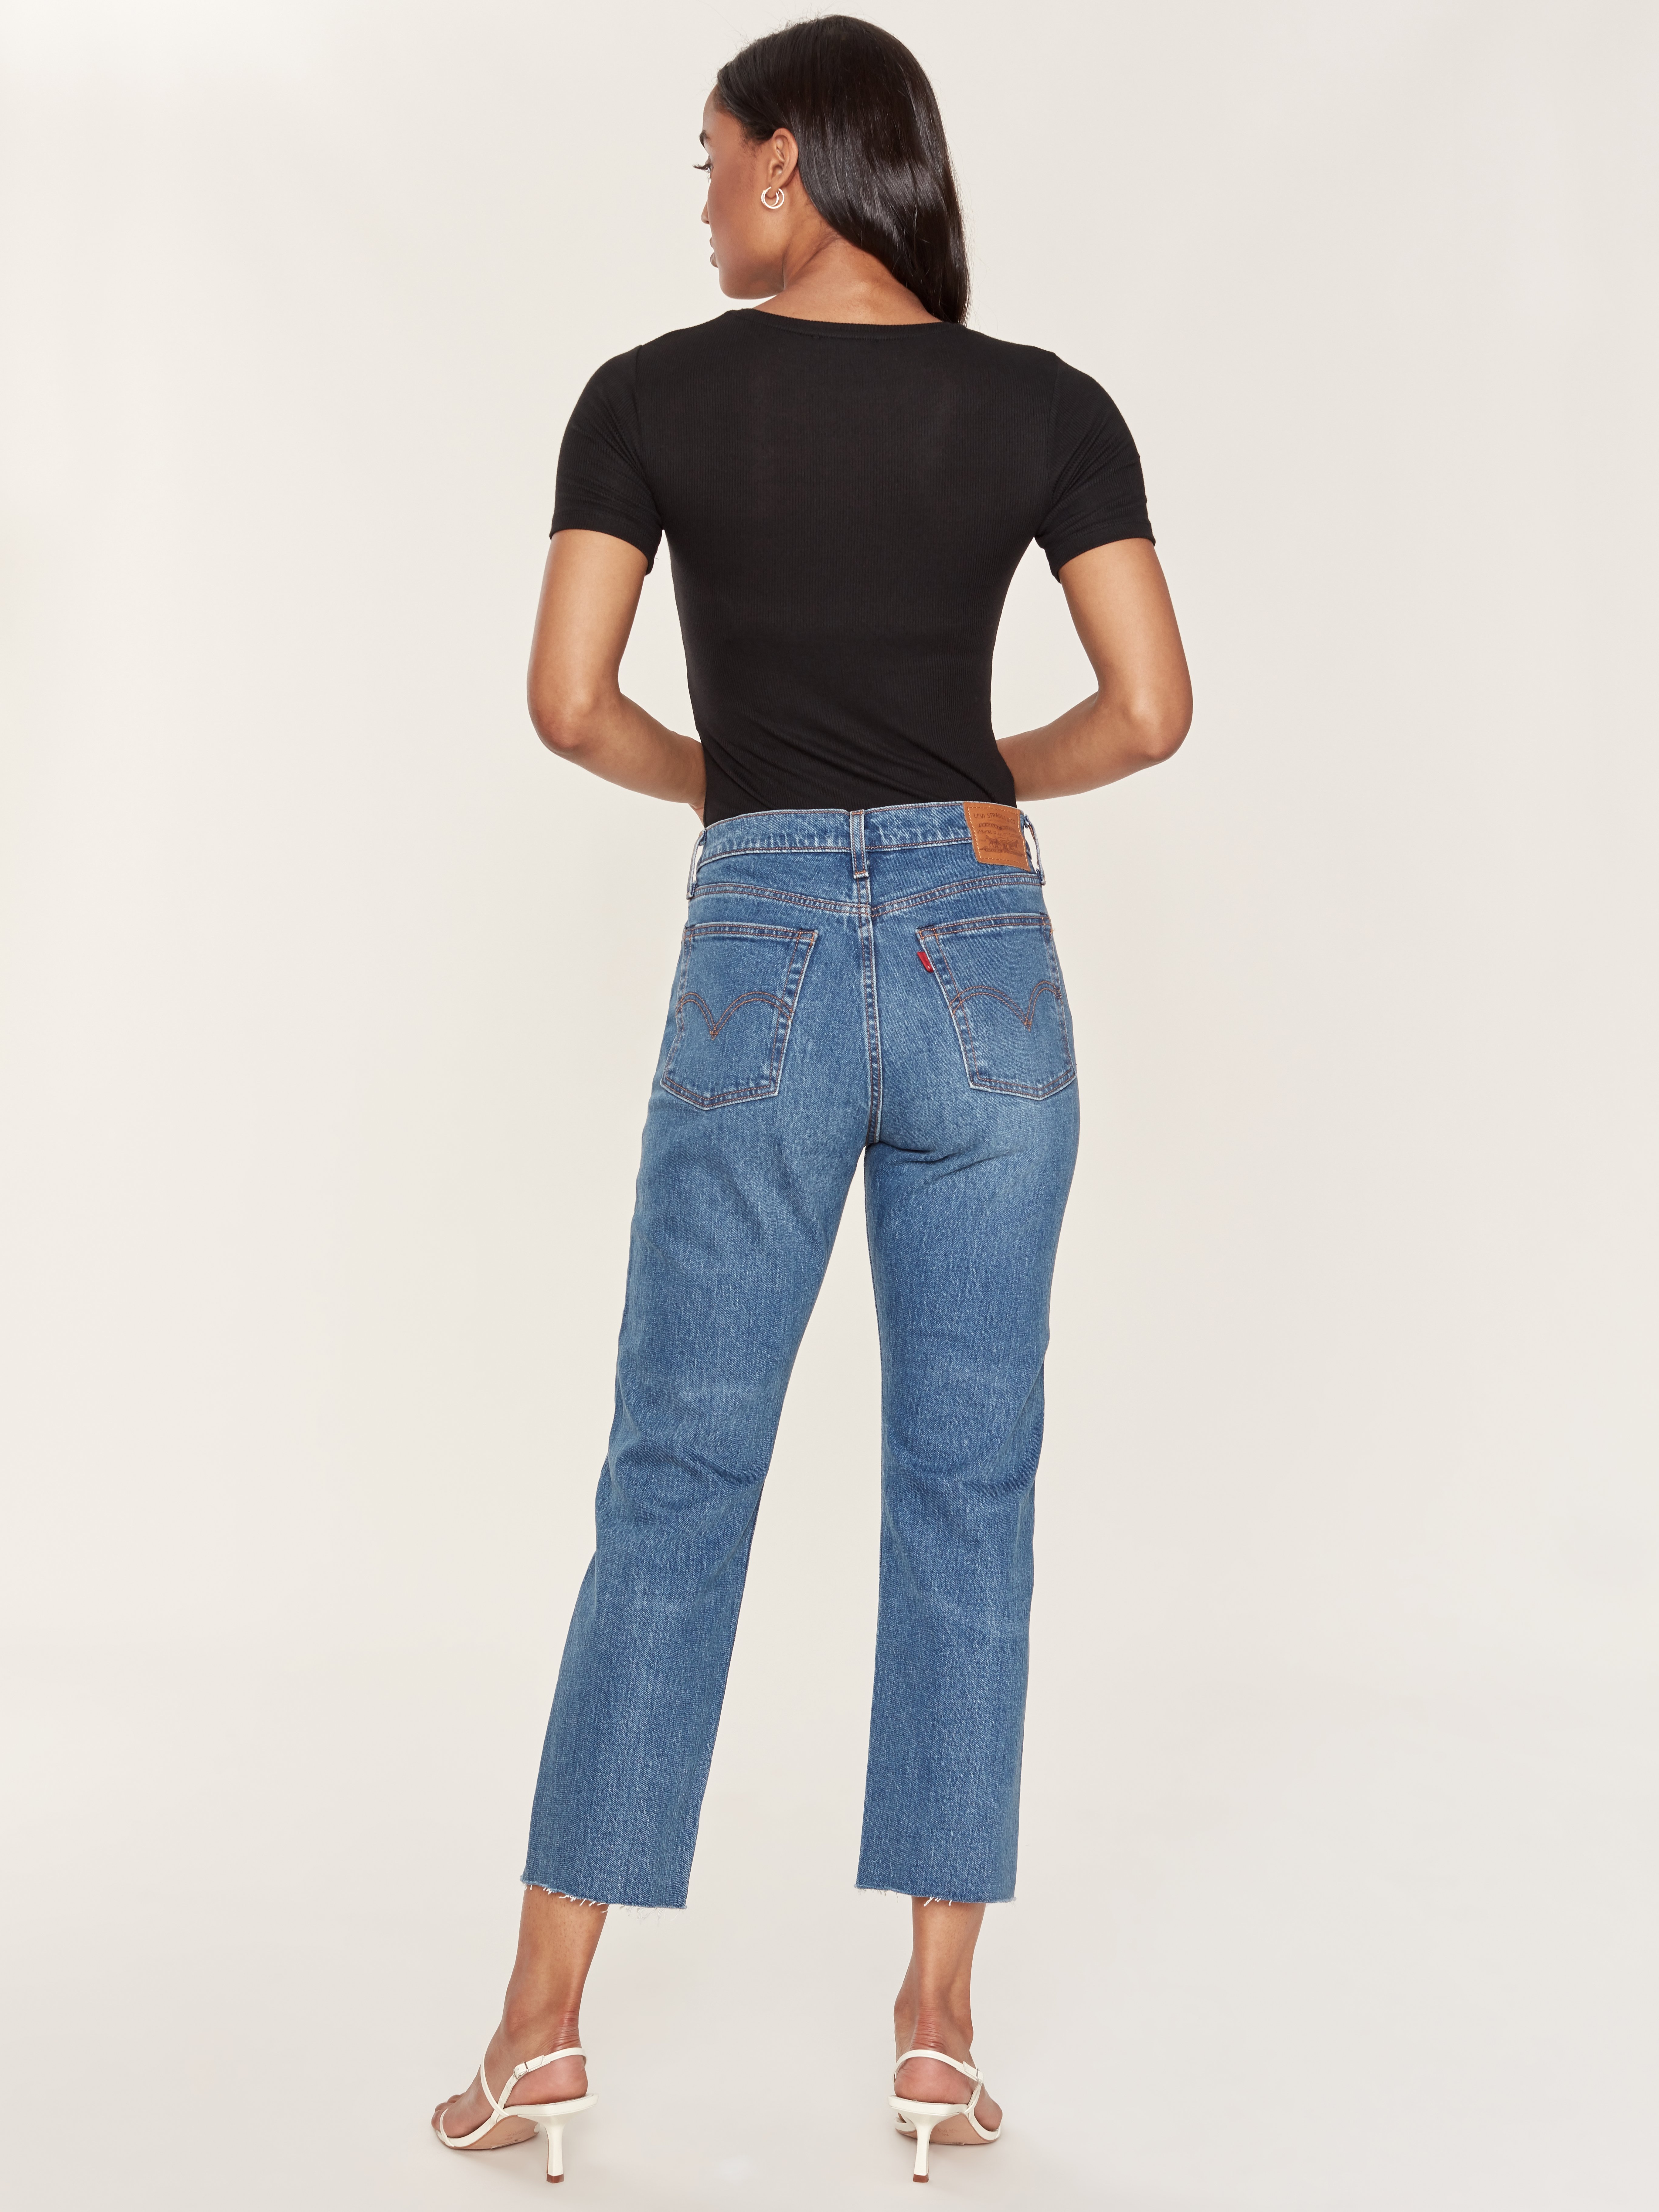 wedgie high rise jeans